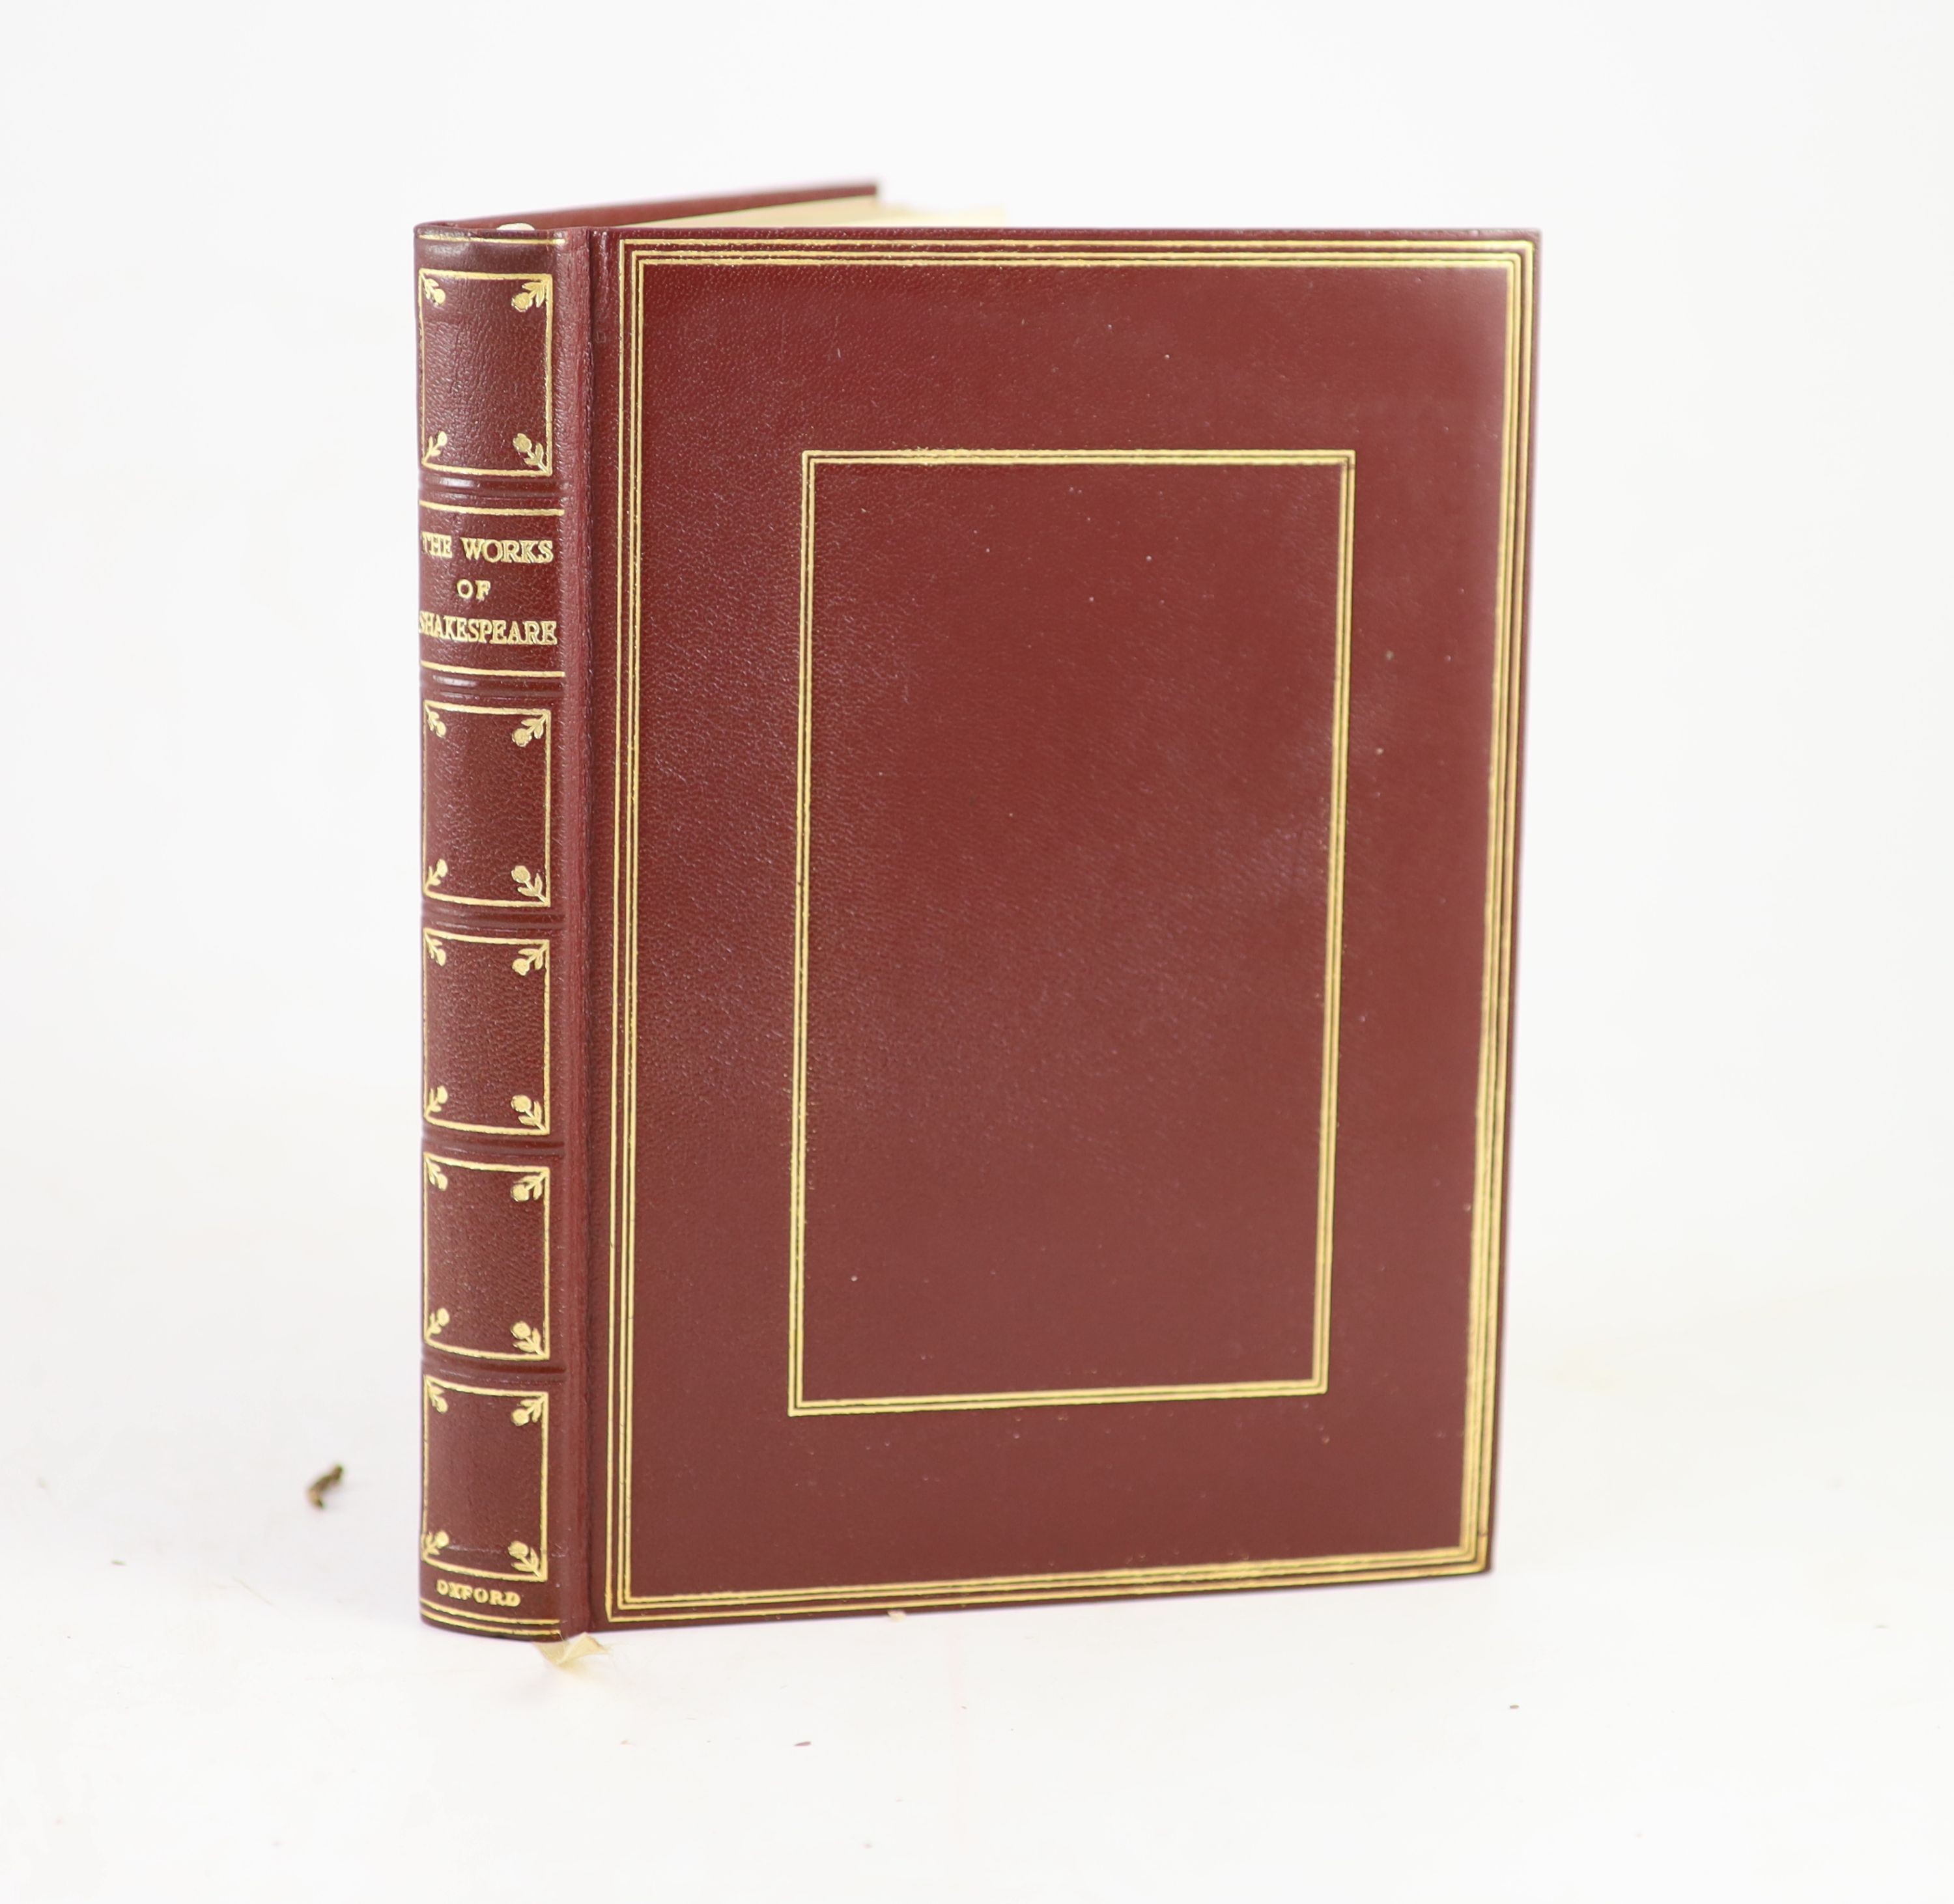 Shakespeare, William. Craig, W.J. (editor) - The Complete Works of William Shakespeare. 1st edition on India paper. Publishers gilt panelled polished morocco, decoratively gilt panelled spine with letters direct, gilt ed